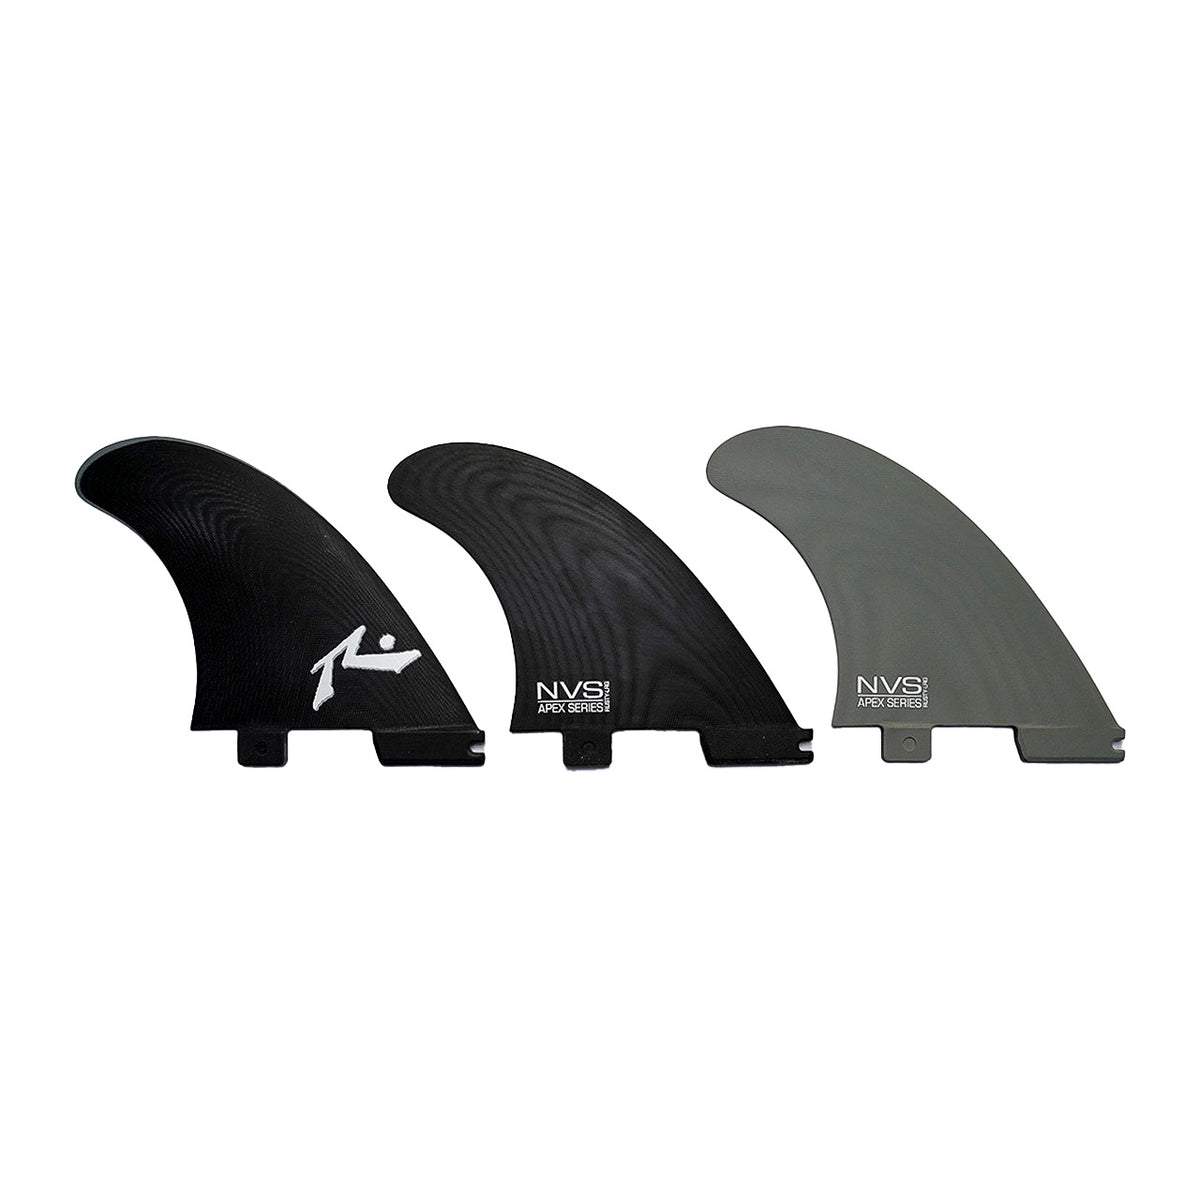 Rusty Thruster Fin Set - NVS Apex G10 - FCS Base, rear screw required